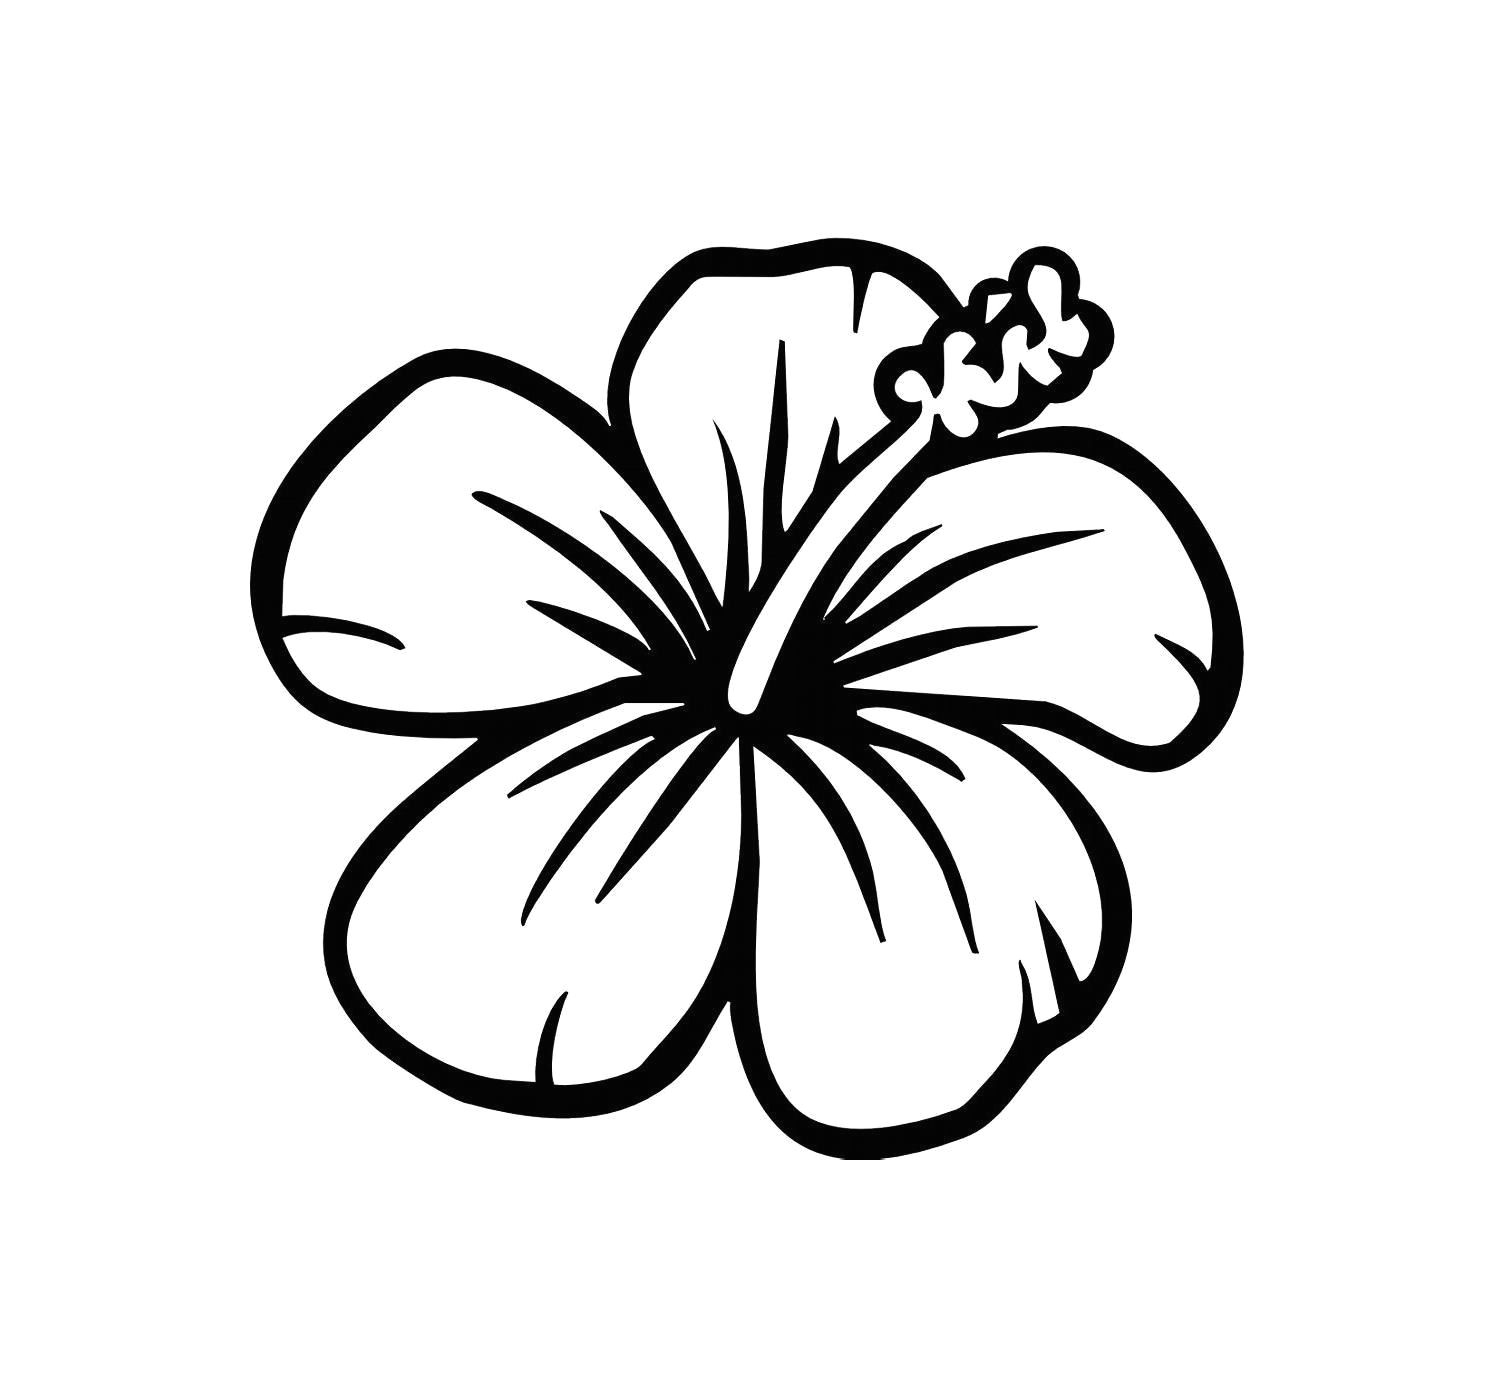 easy leaf outline image nextinvitation templates hawaiian flower drawing hibiscus flower drawing easy